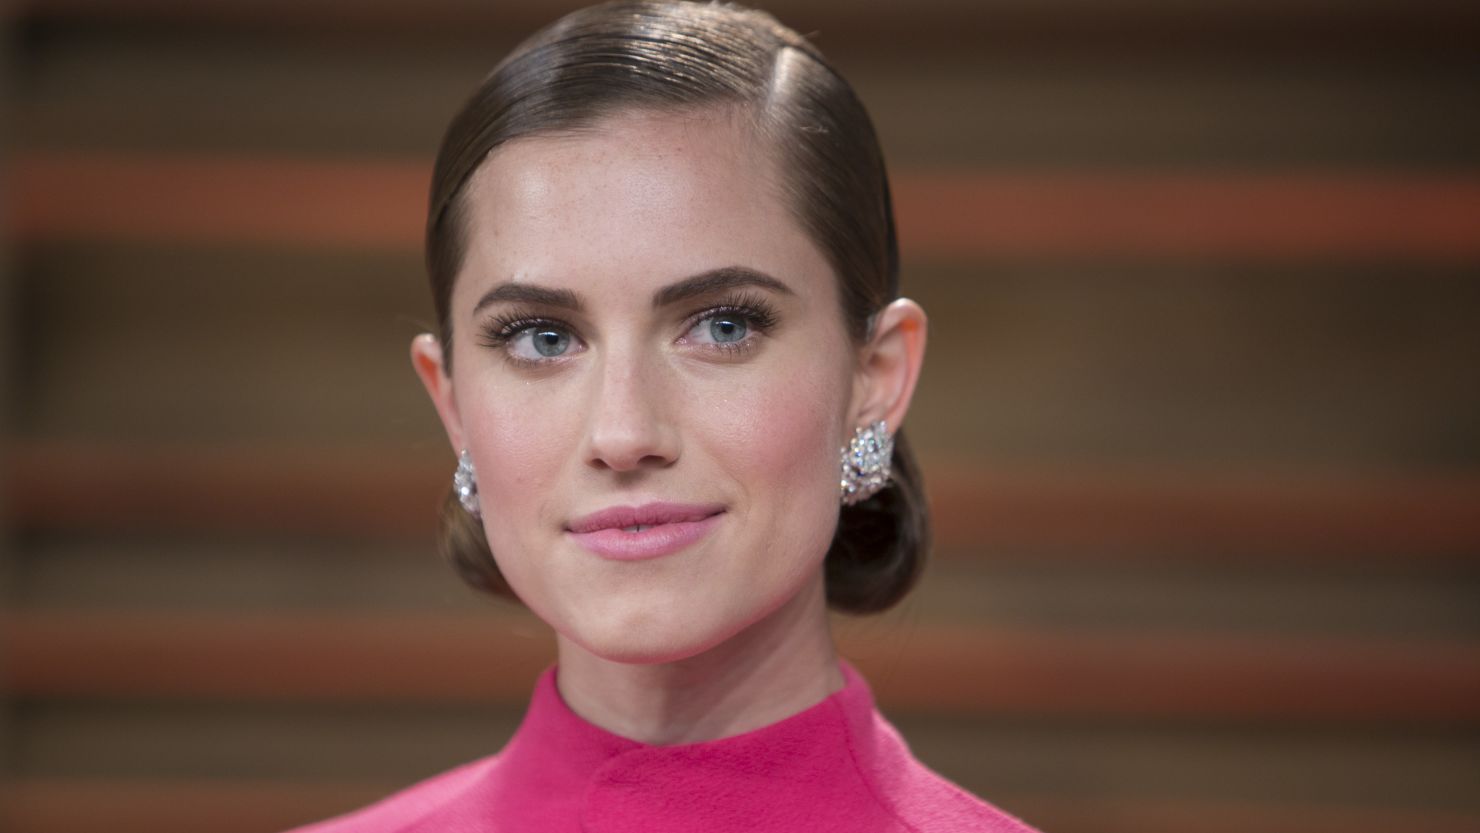 Actress Allison Williams attends the 2014 Vanity Fair Oscar party in West Hollywood.